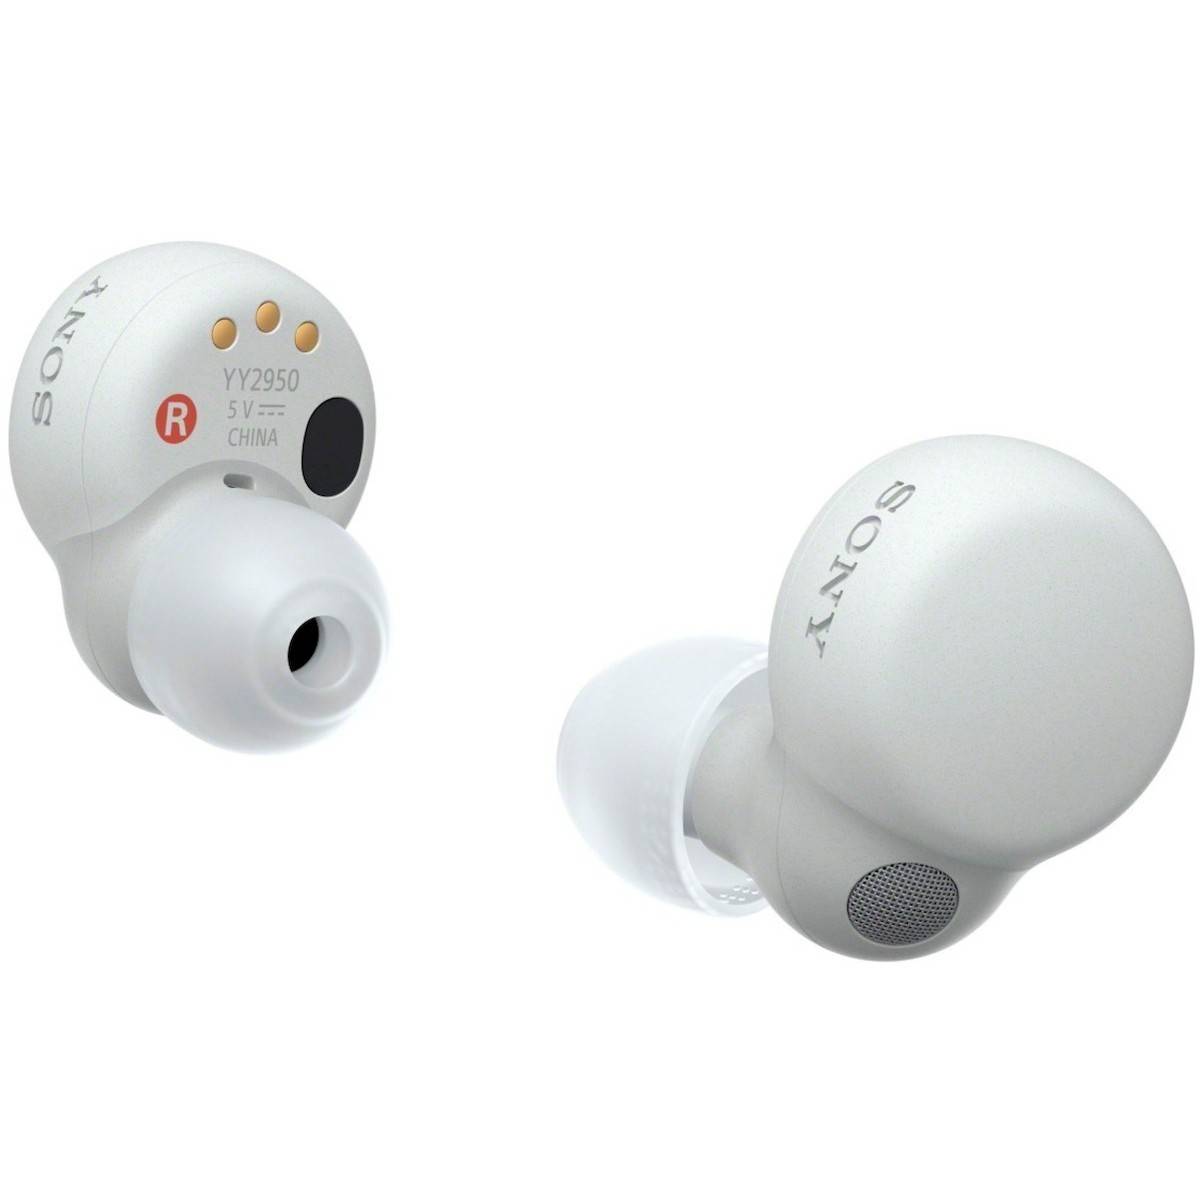 Sony LinkBuds S in White